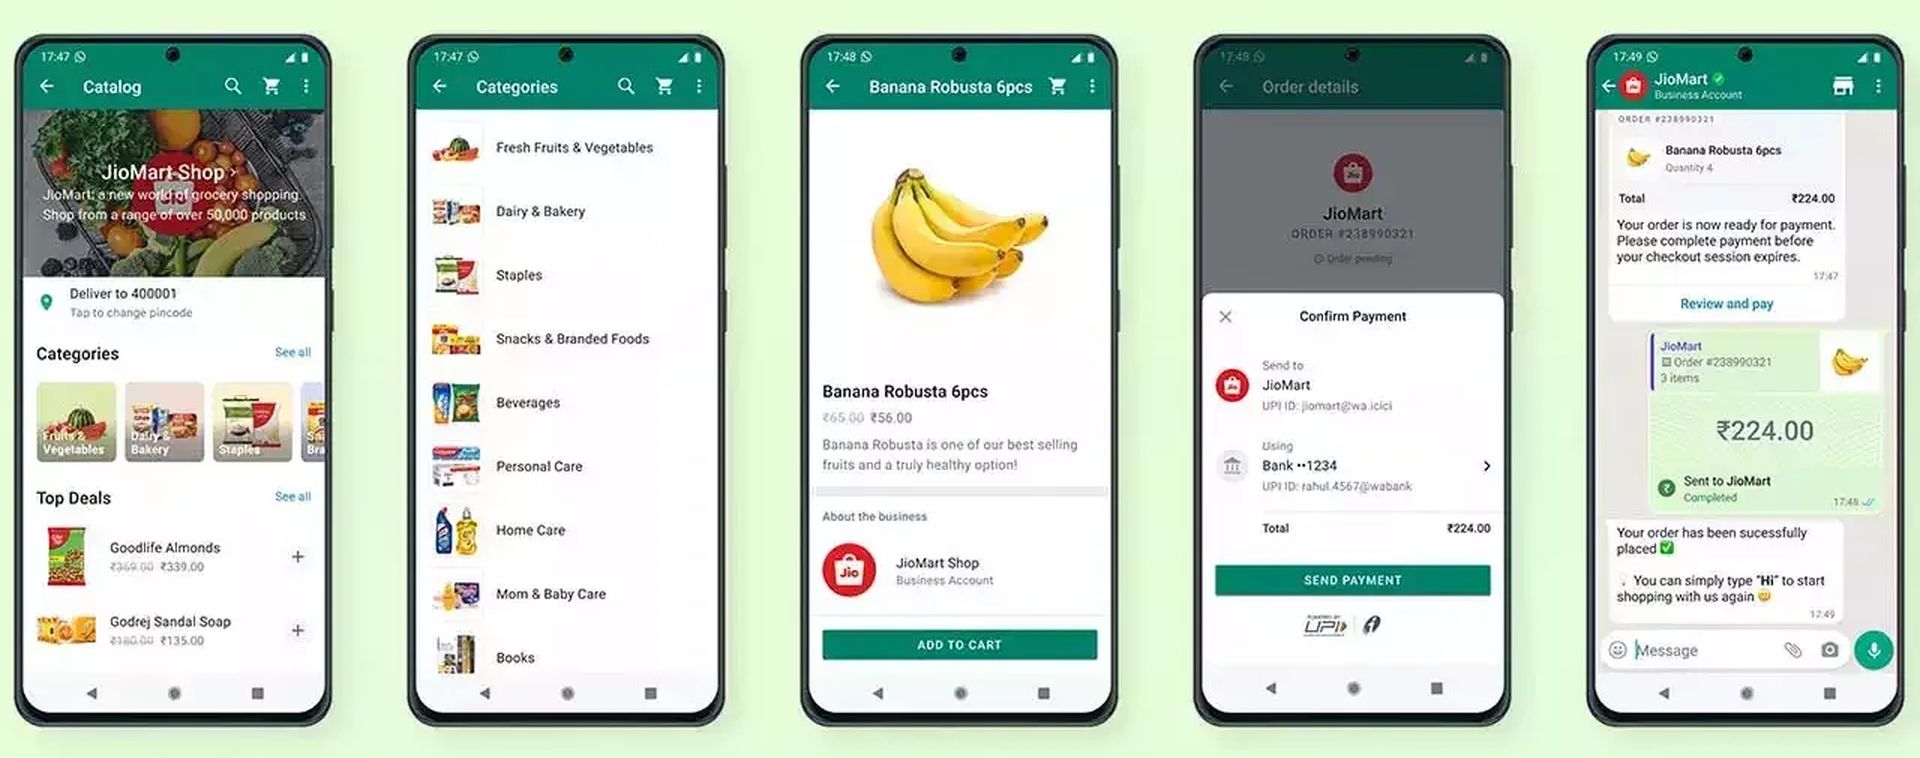 In this article, we are going to be covering Whatsapp Shopping which became available in India after a collaboration between Meta and Jio Platforms.